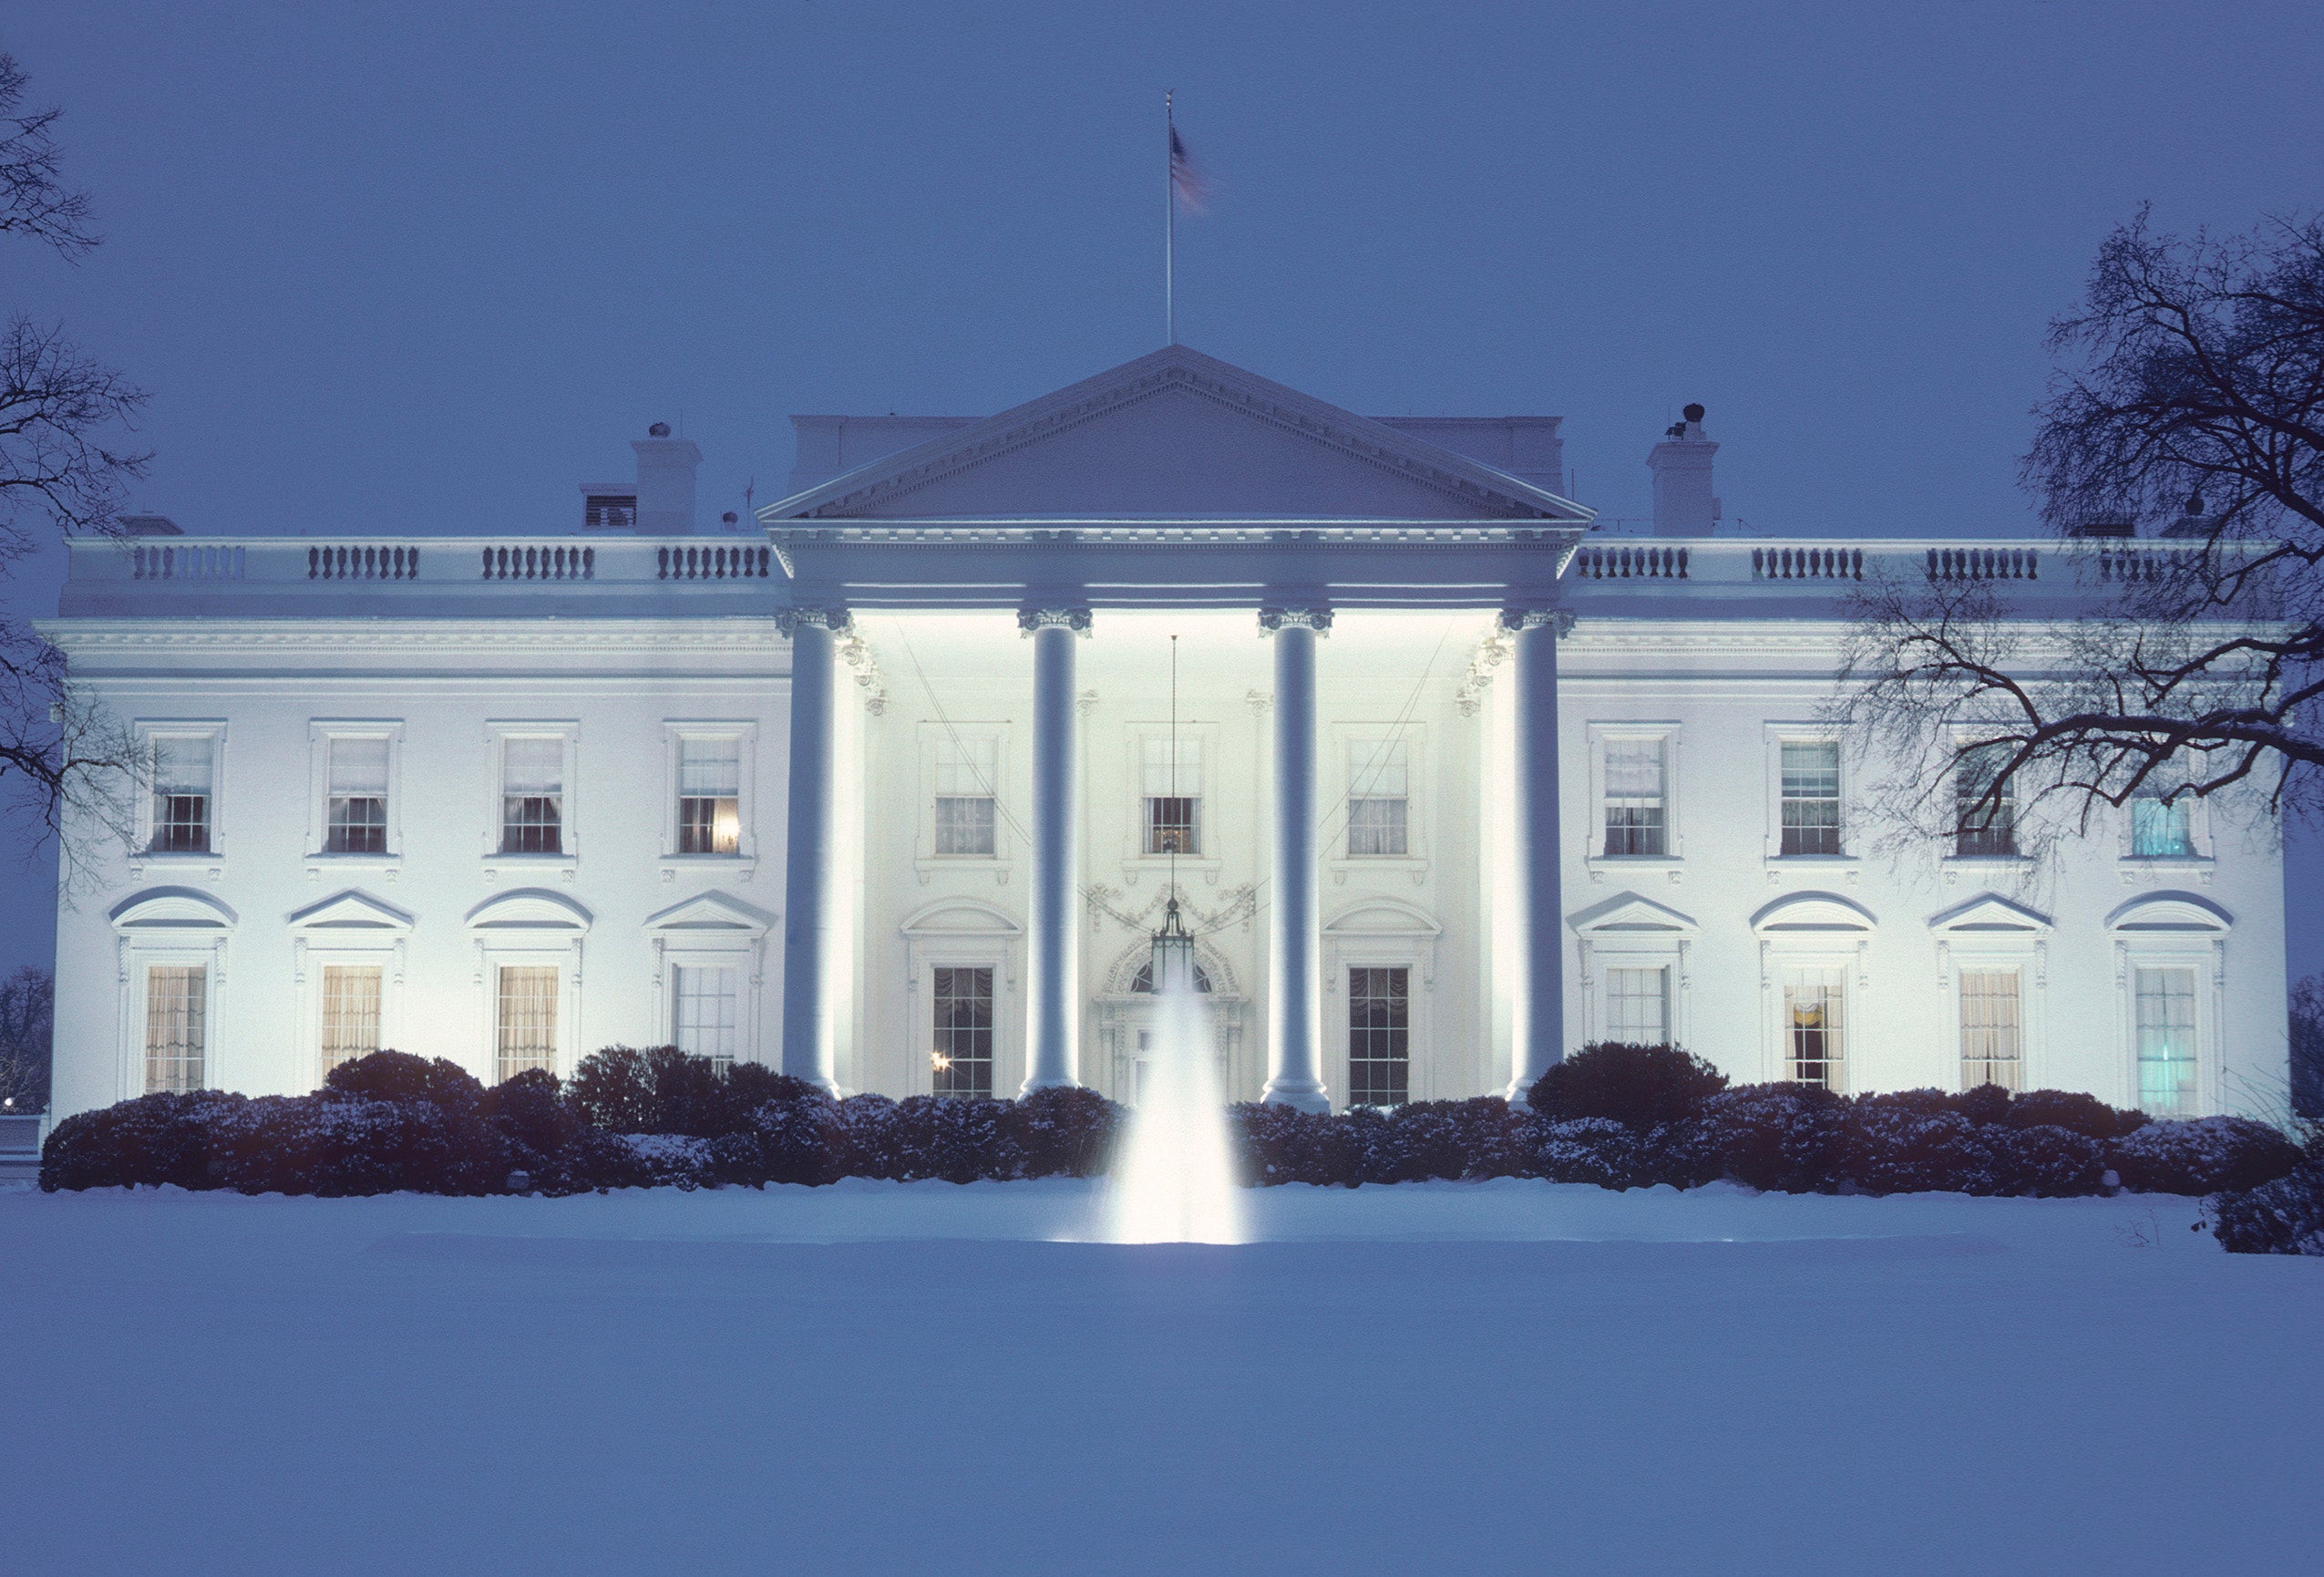 The White House after a heavy snowfall